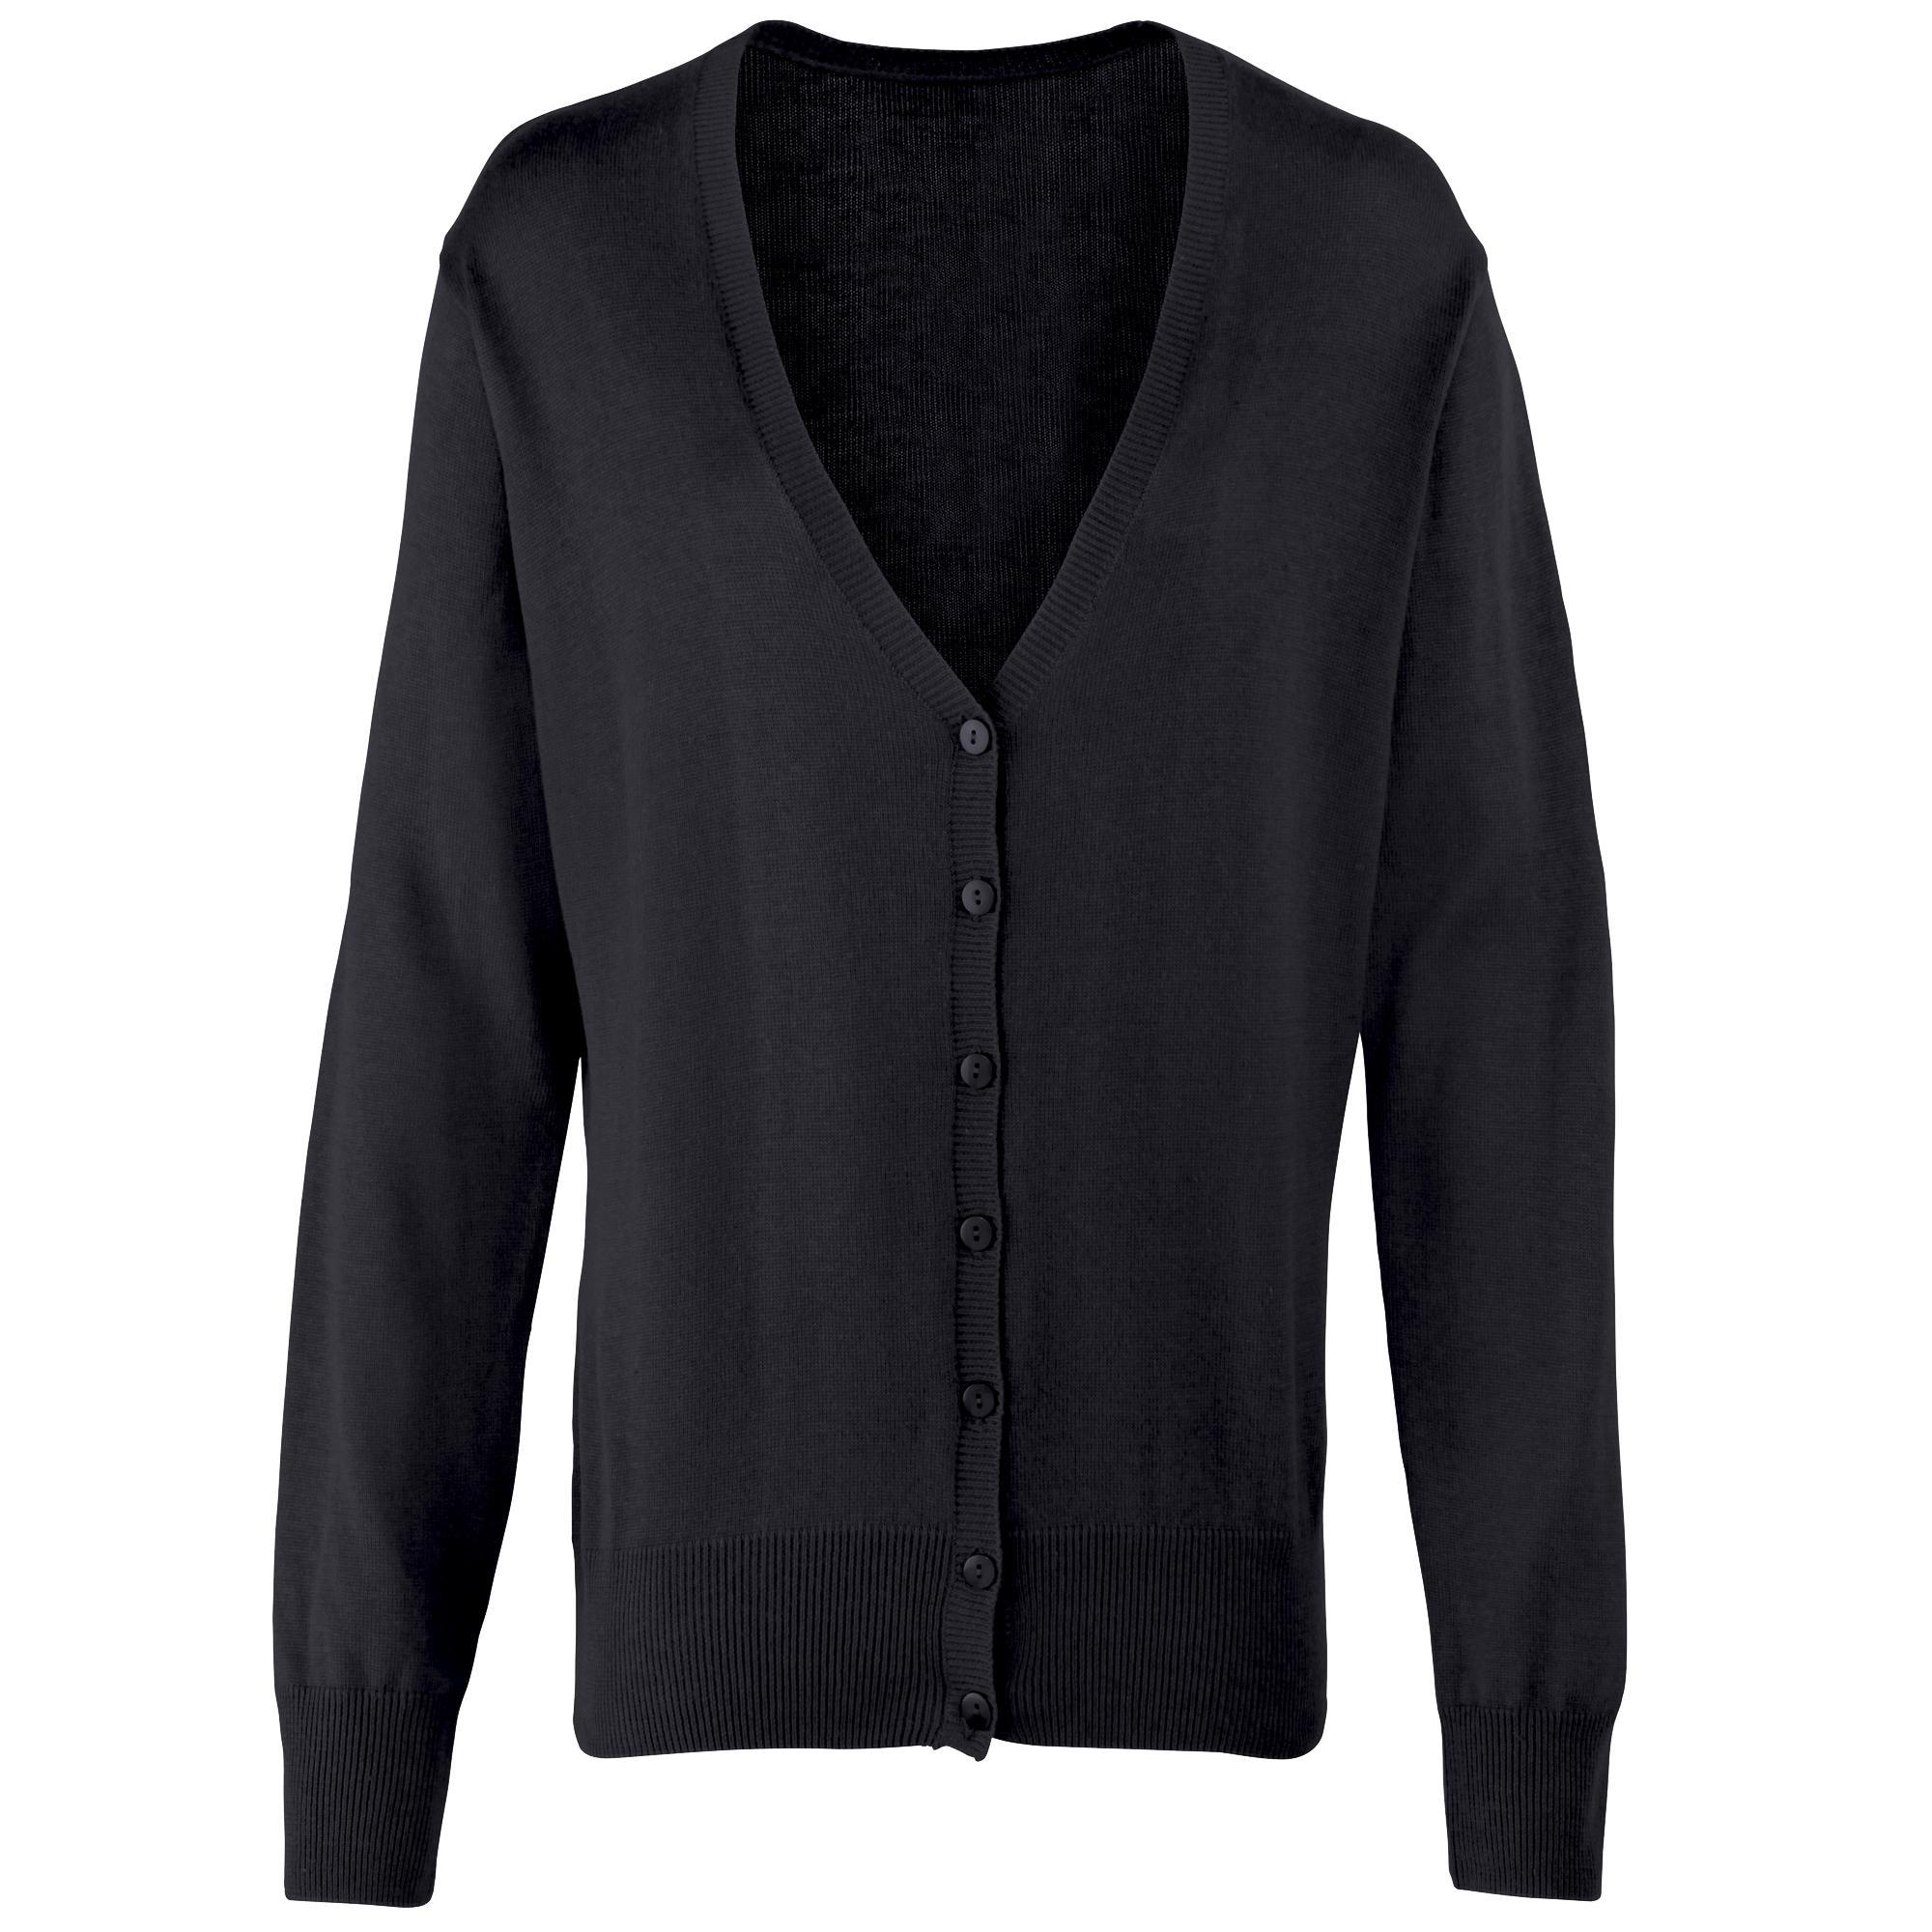 Premier Womens/Ladies Button Through Long Sleeve V-neck Knitted Cardigan (Black) (12)